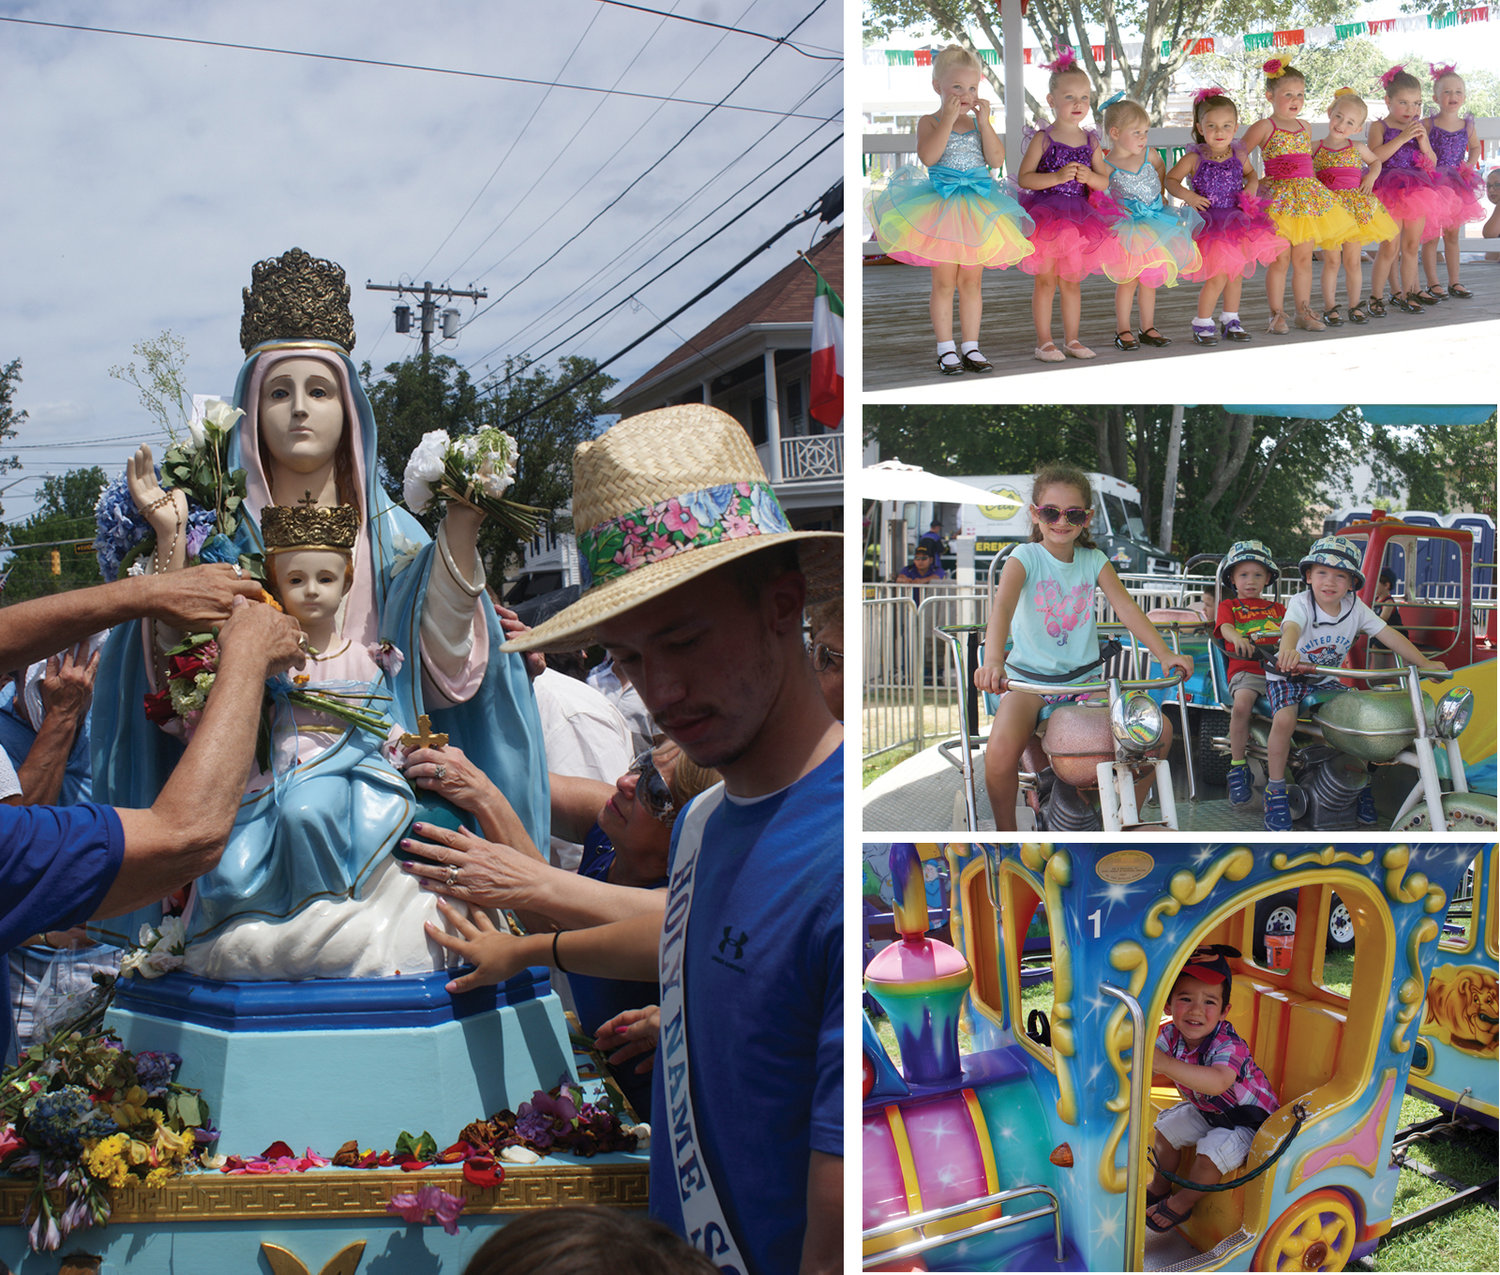 PROUD TRADITION: After the pandemic forced a significantly scaling back of the 2020 festivities, St. Mary’s Feast is set to return in Cranston’s Knightsville neighborhood in July.